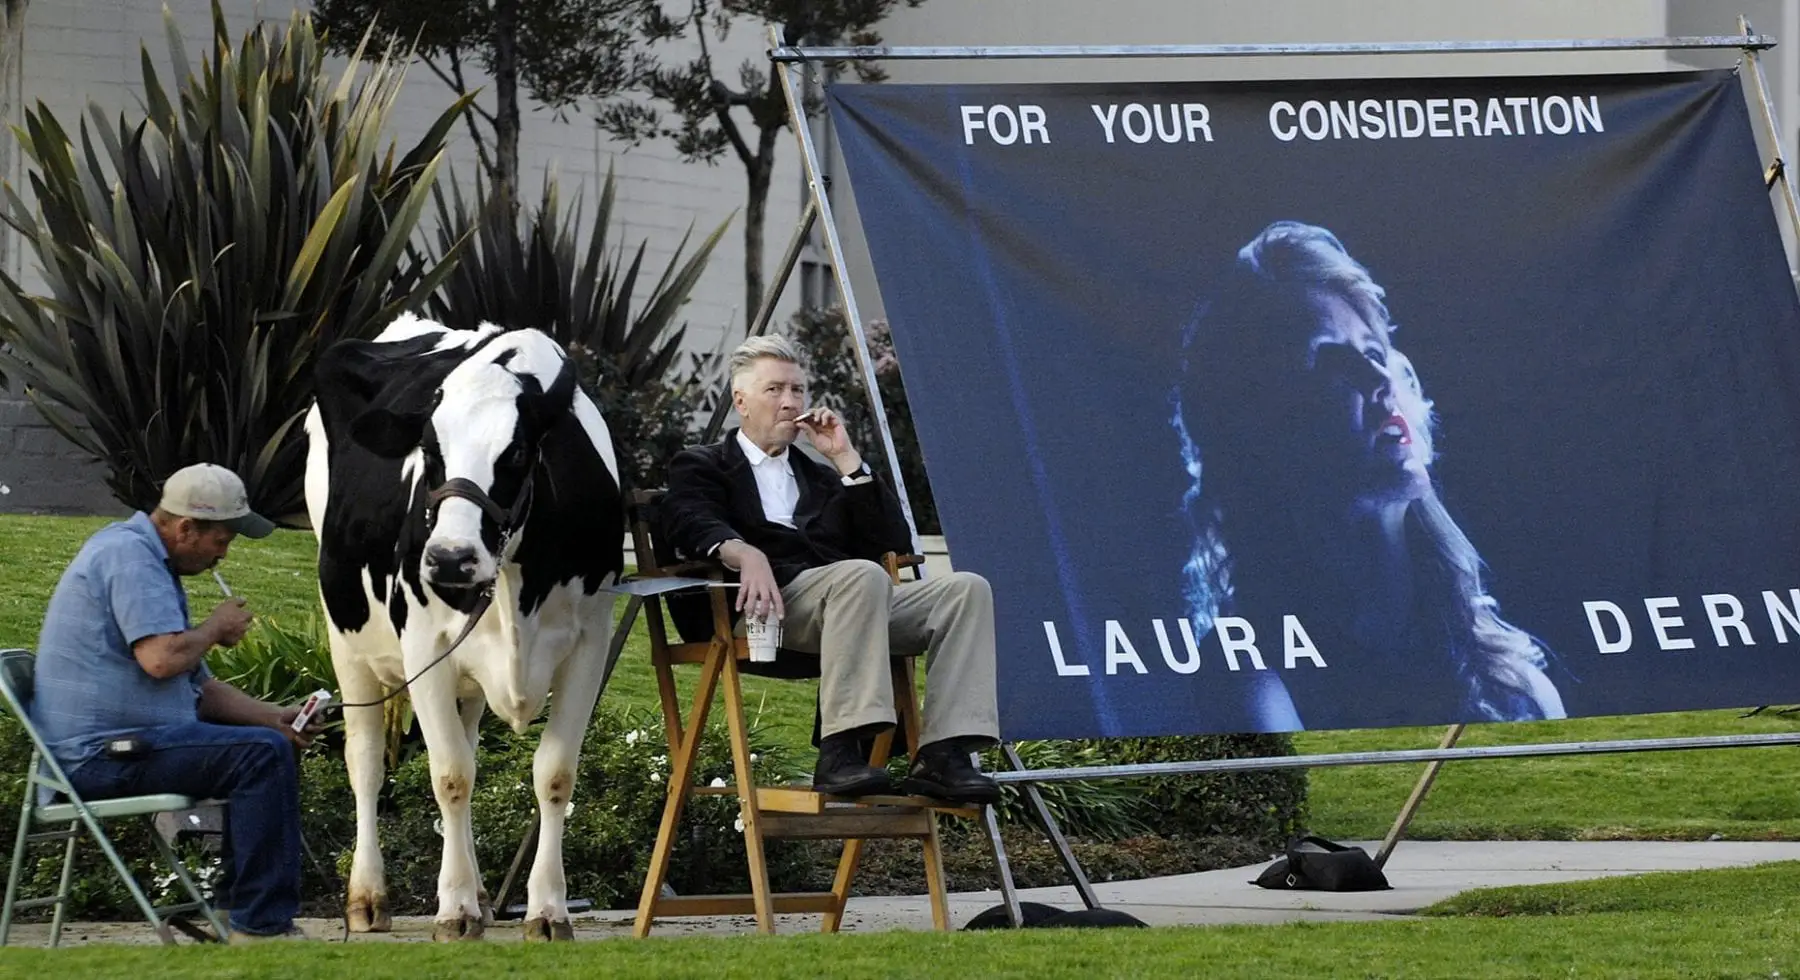 David Lycnh campaigns for Laura Dern with a cow